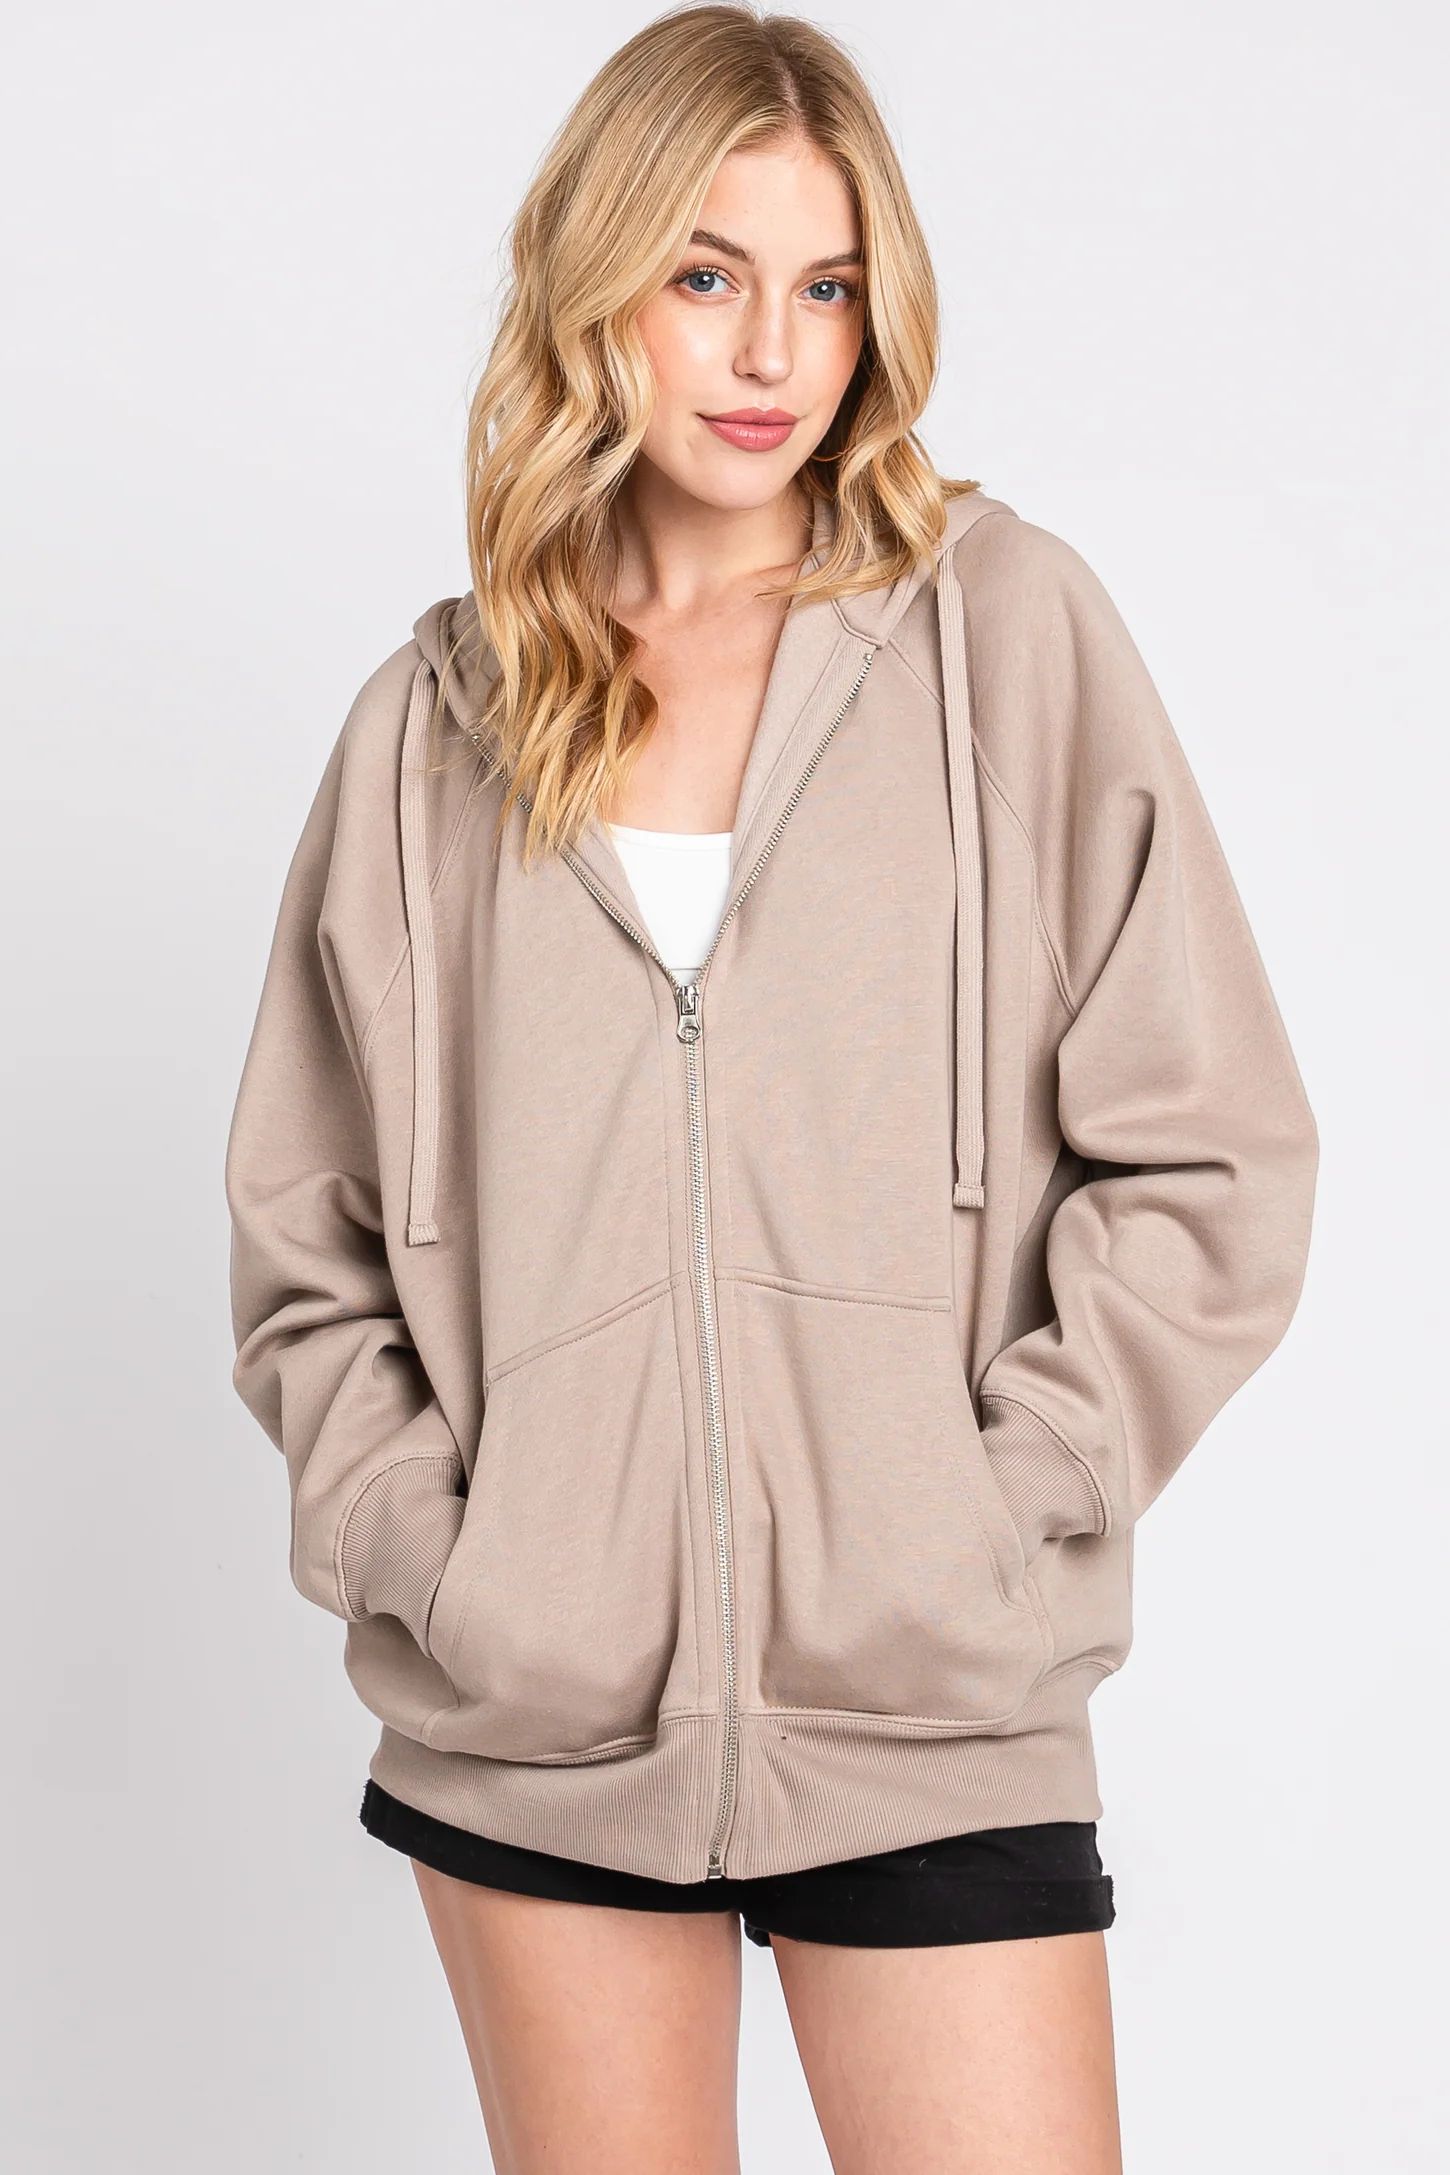 Taupe Front Zipper Hooded Sweater | PinkBlush Maternity